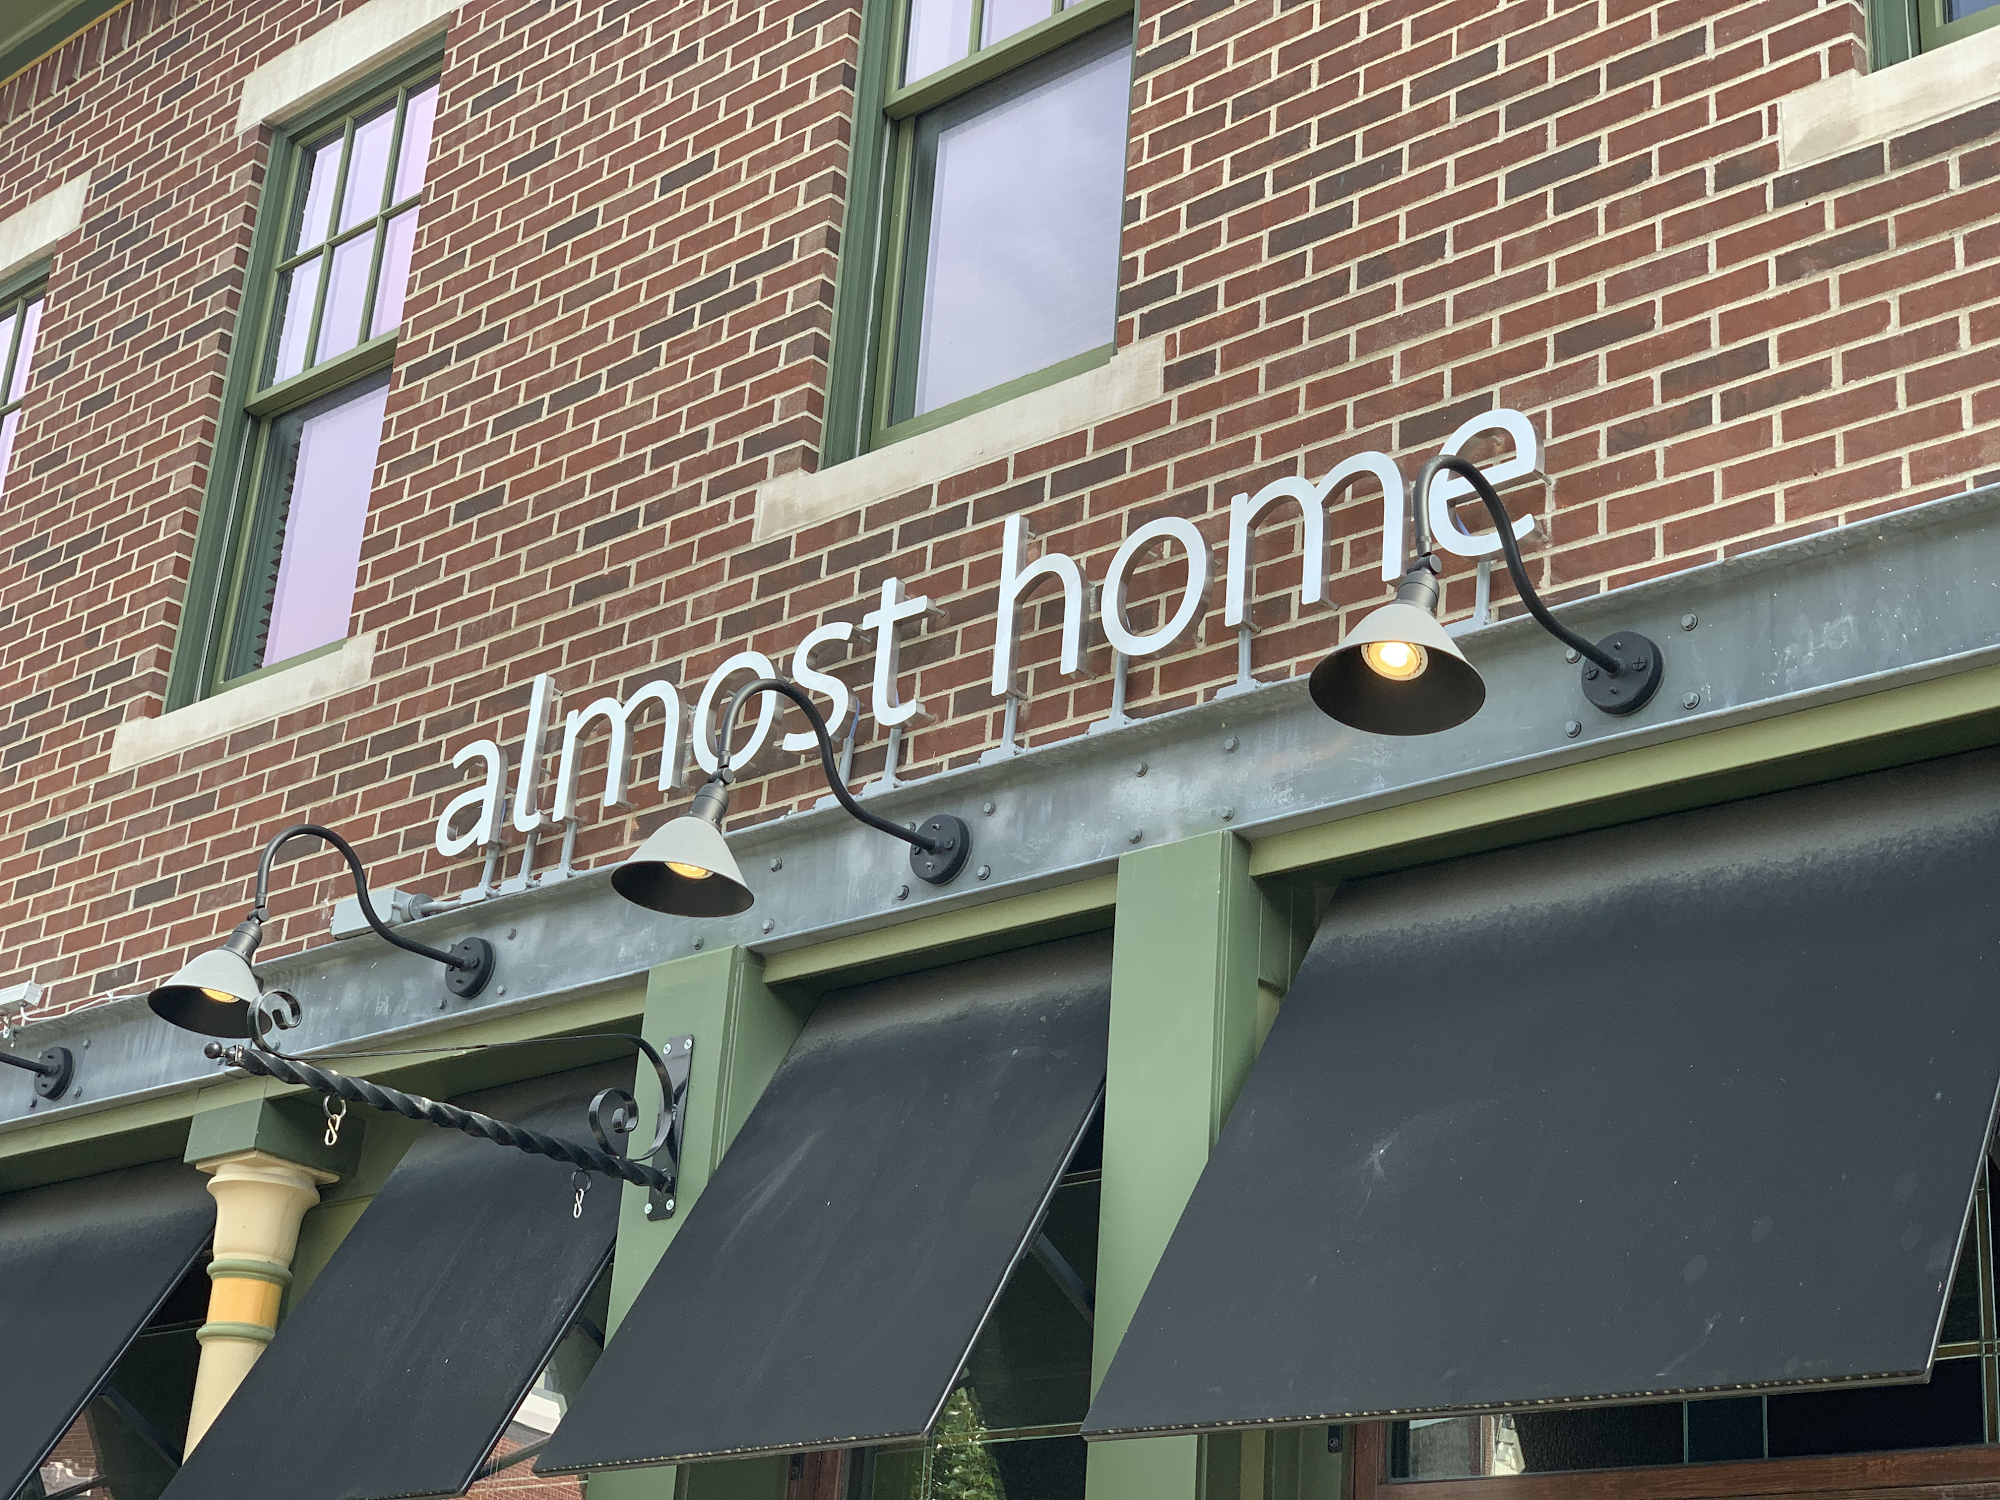 Almost Home Restaurant